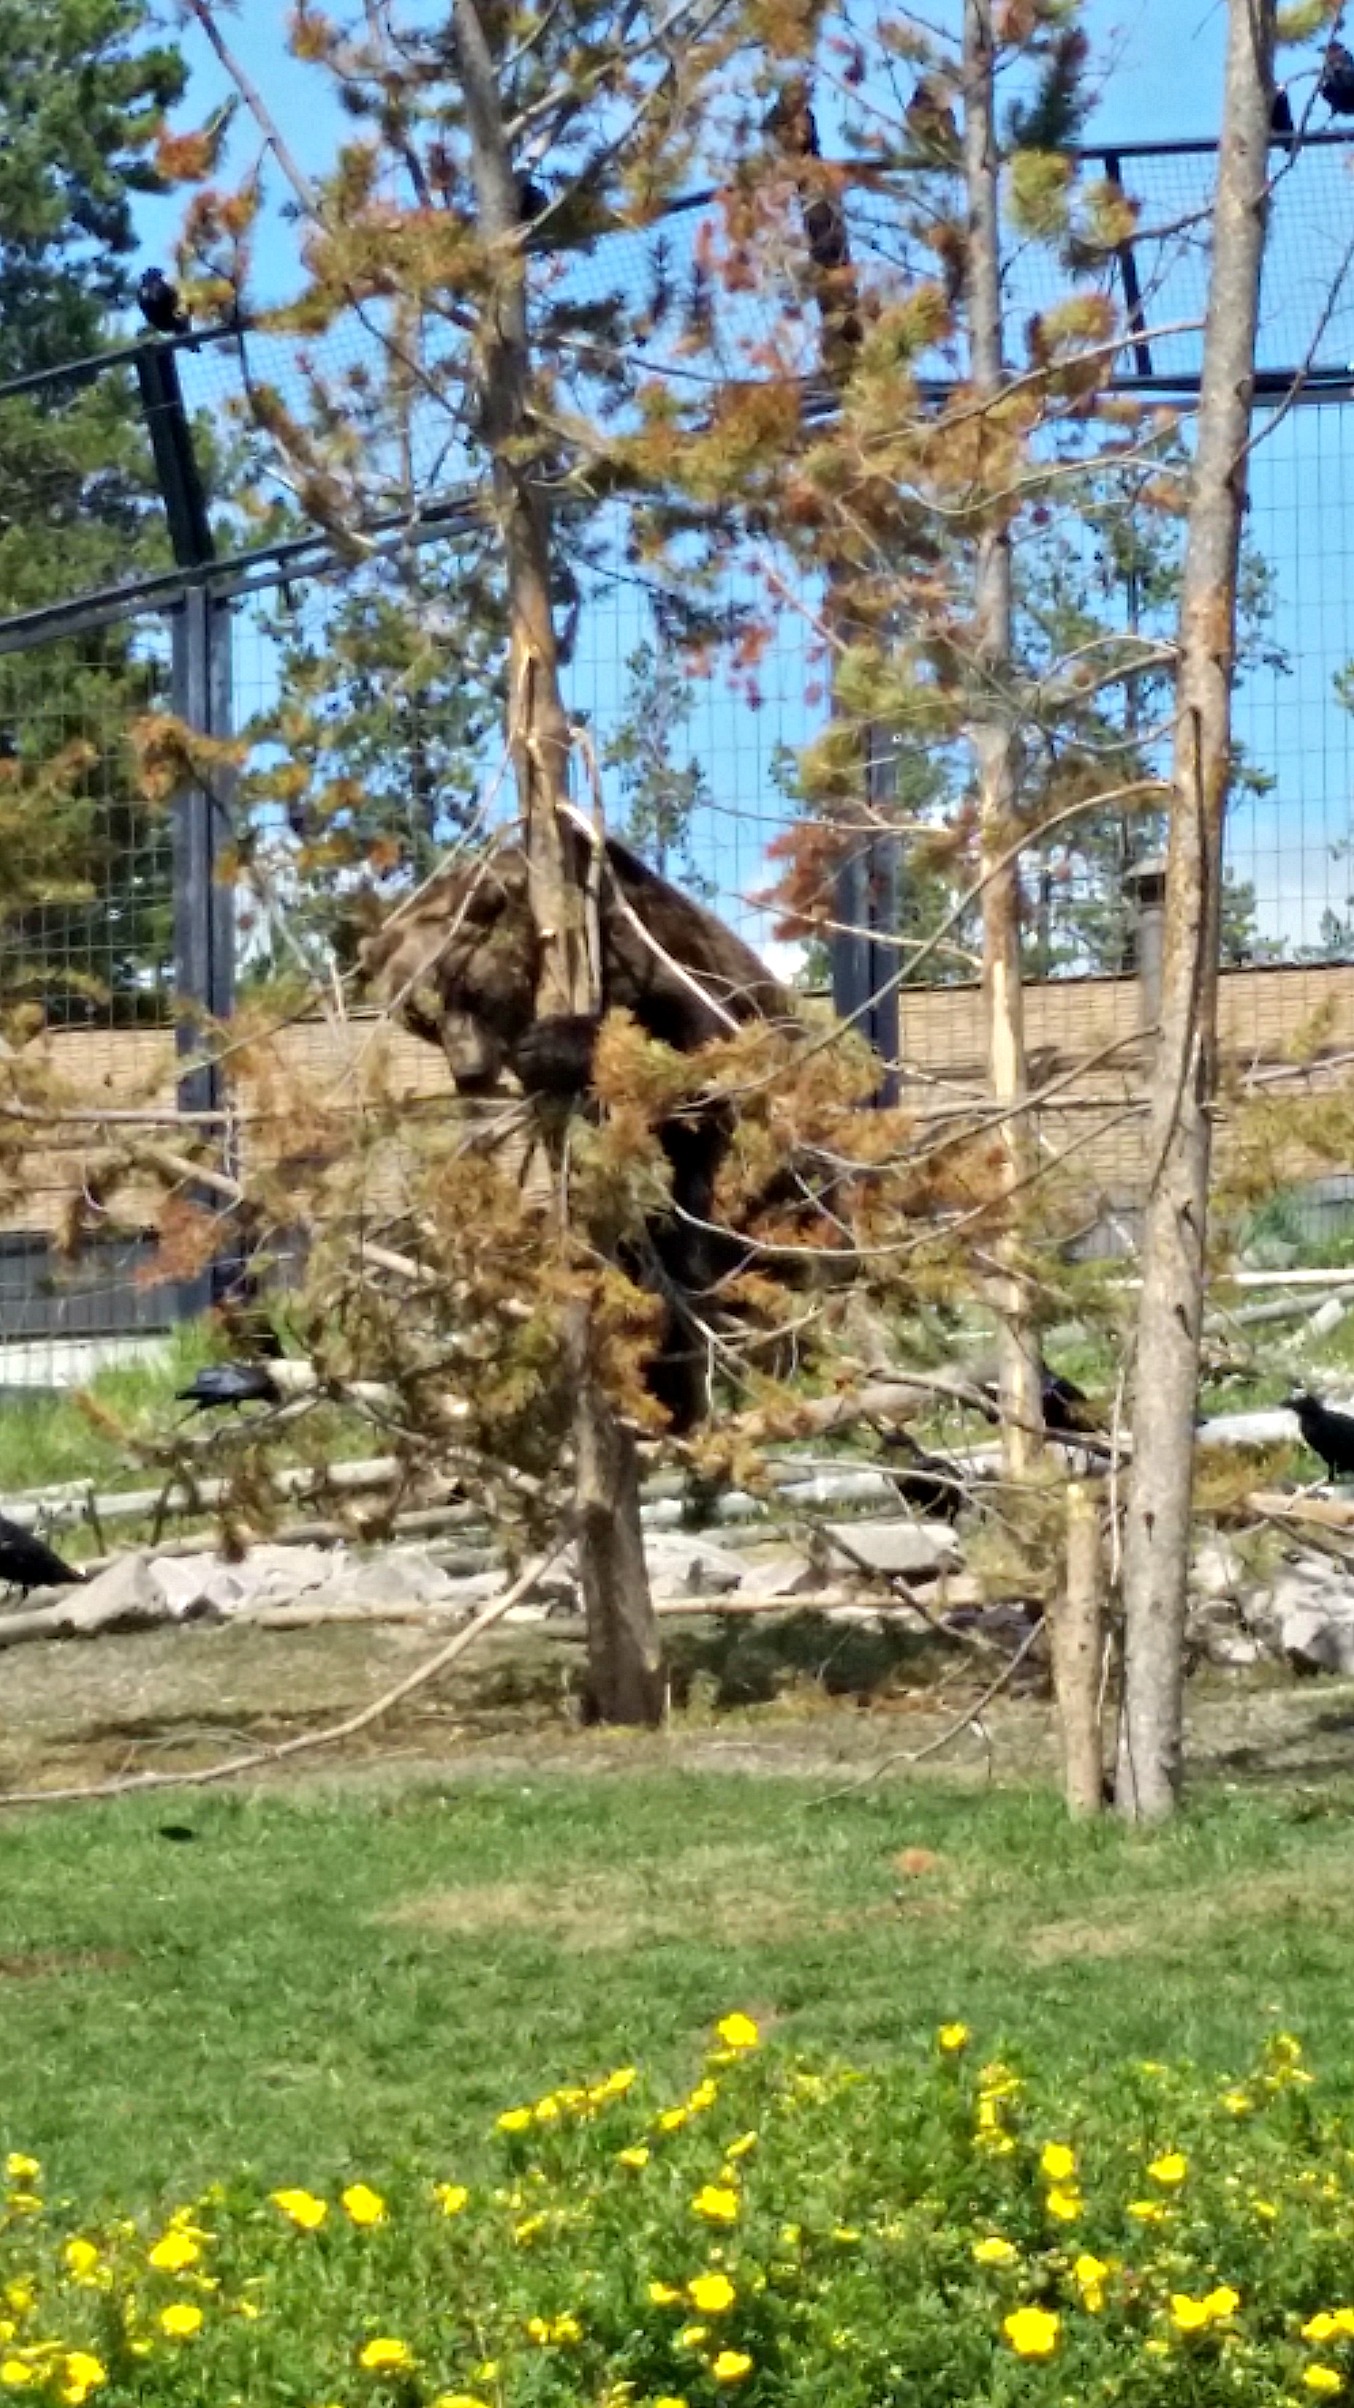 Grizzly Bear climbing tree for some PB at Grizzly & Wolf Discovery in Montana.